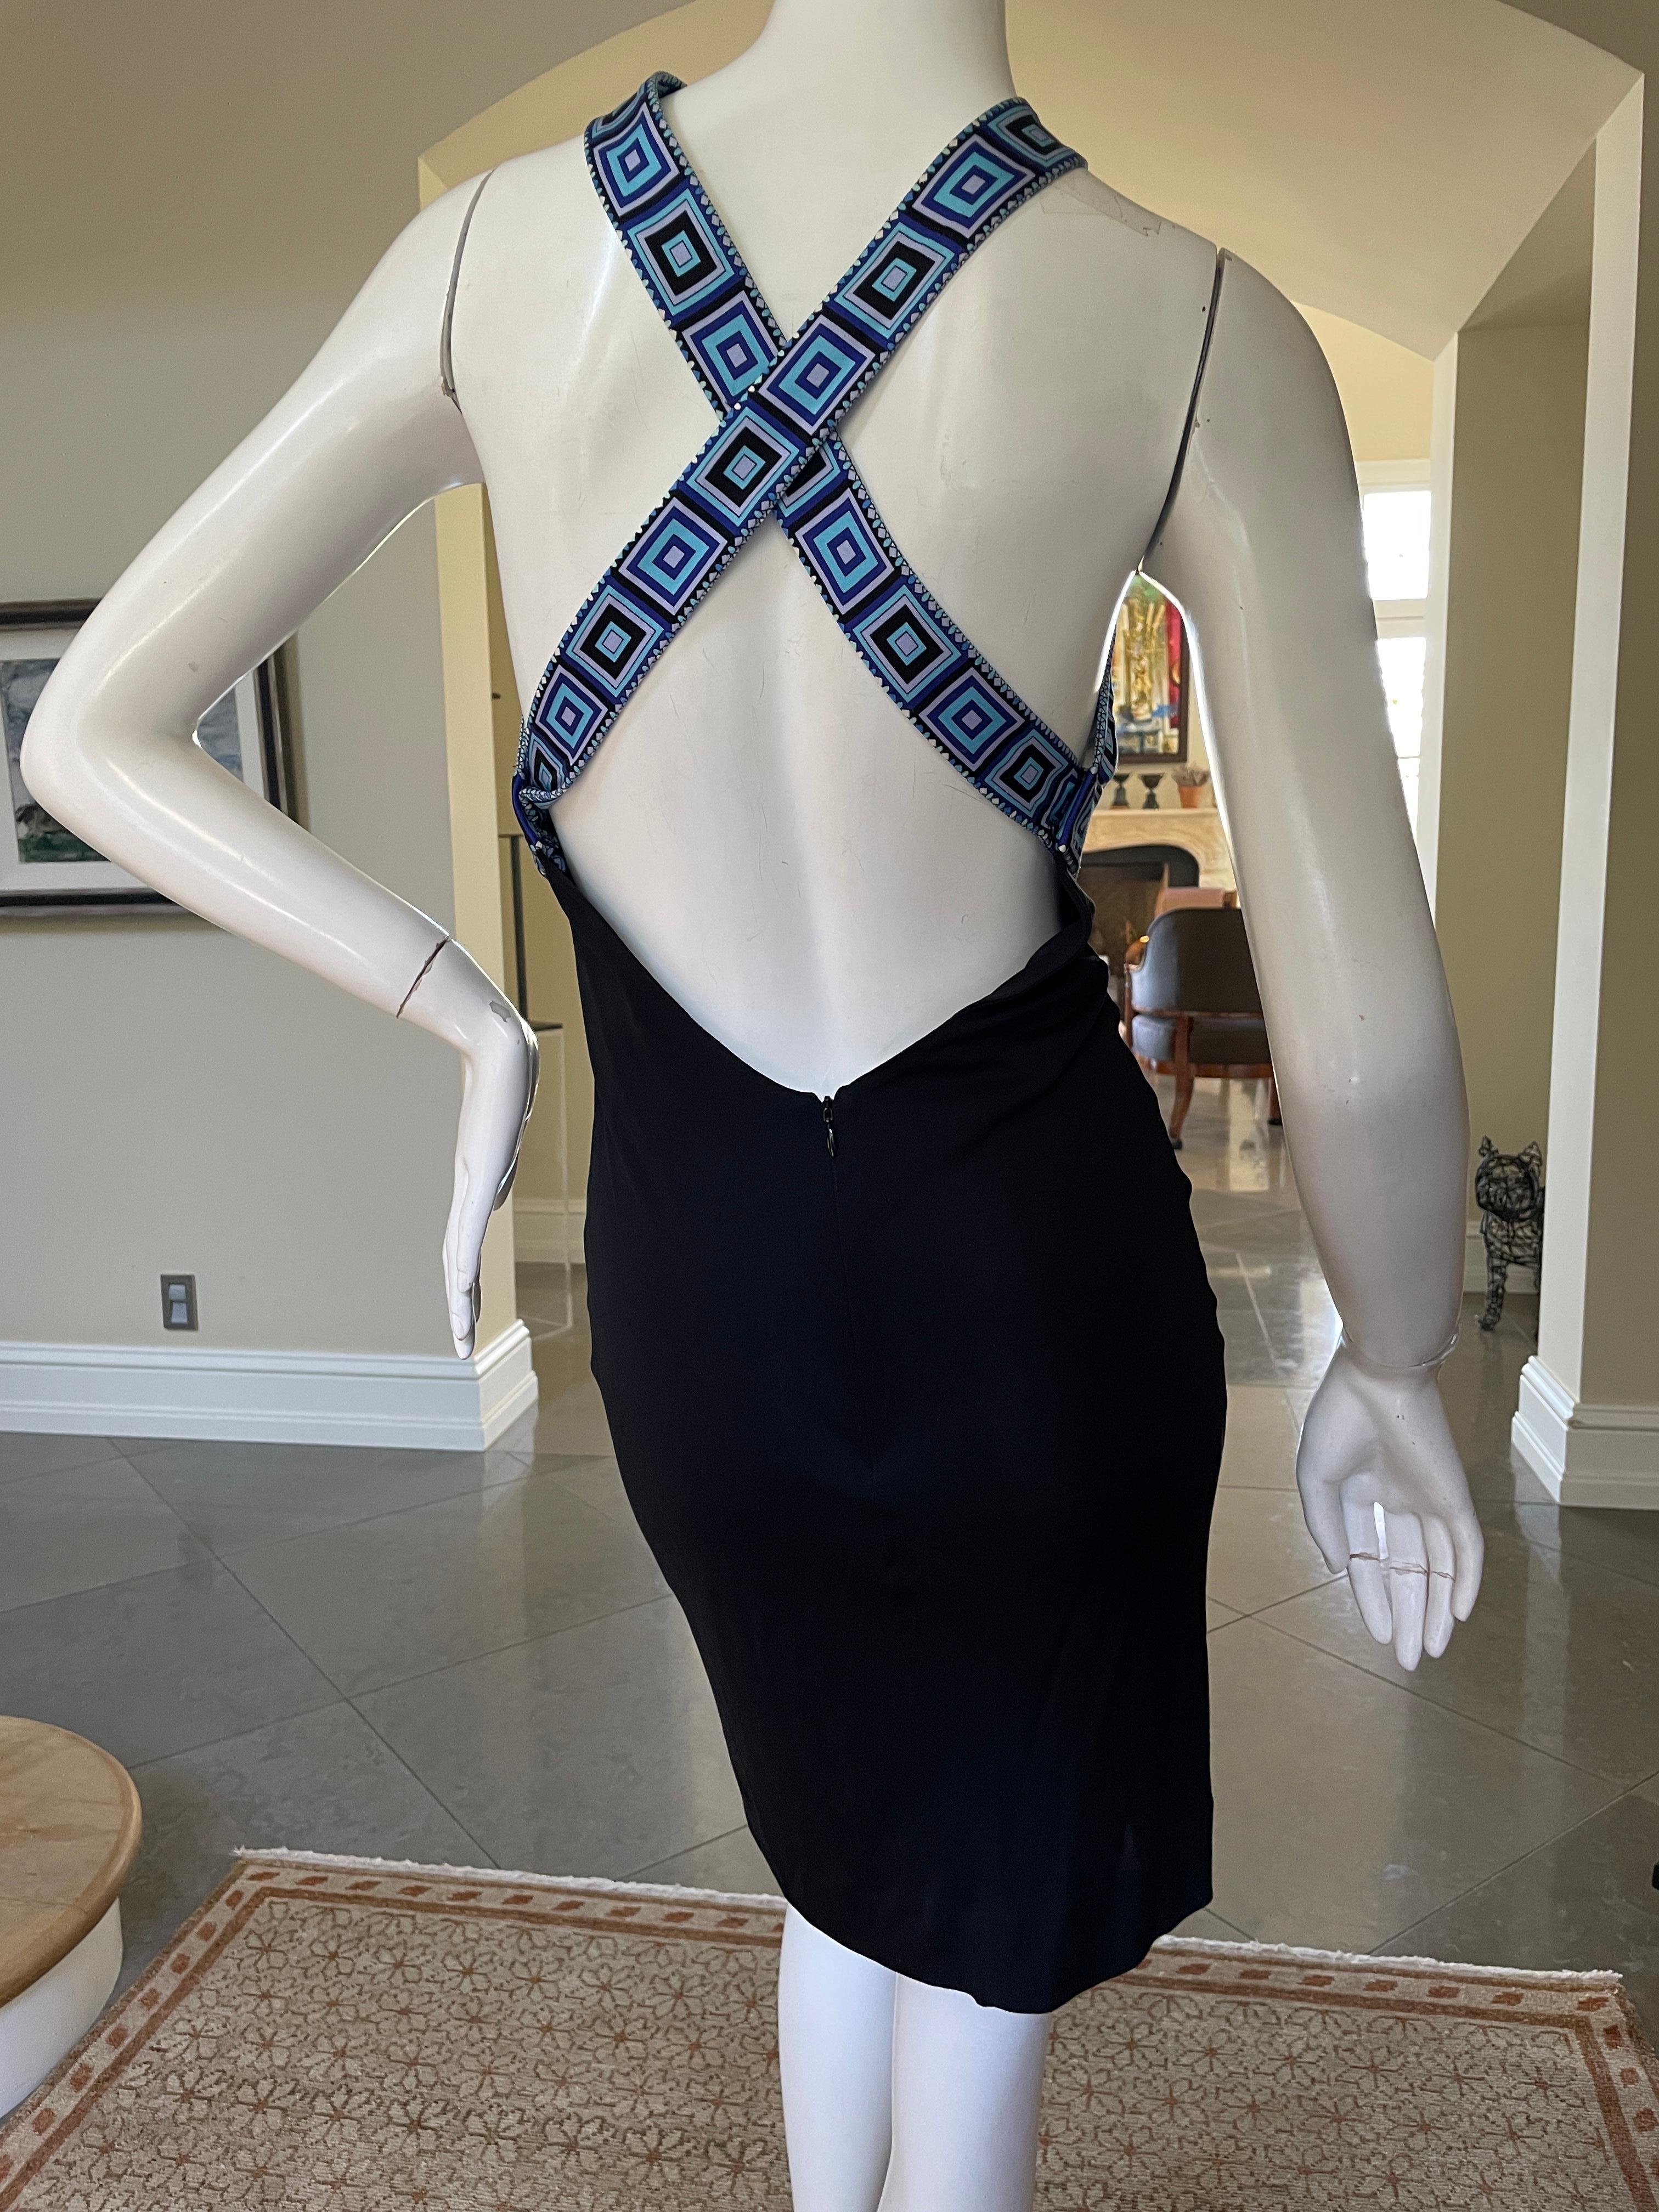 Emilio Pucci Halter Style Vintage Racer Back Mini Dress with Peek a Boo Keyhole In Excellent Condition For Sale In Cloverdale, CA